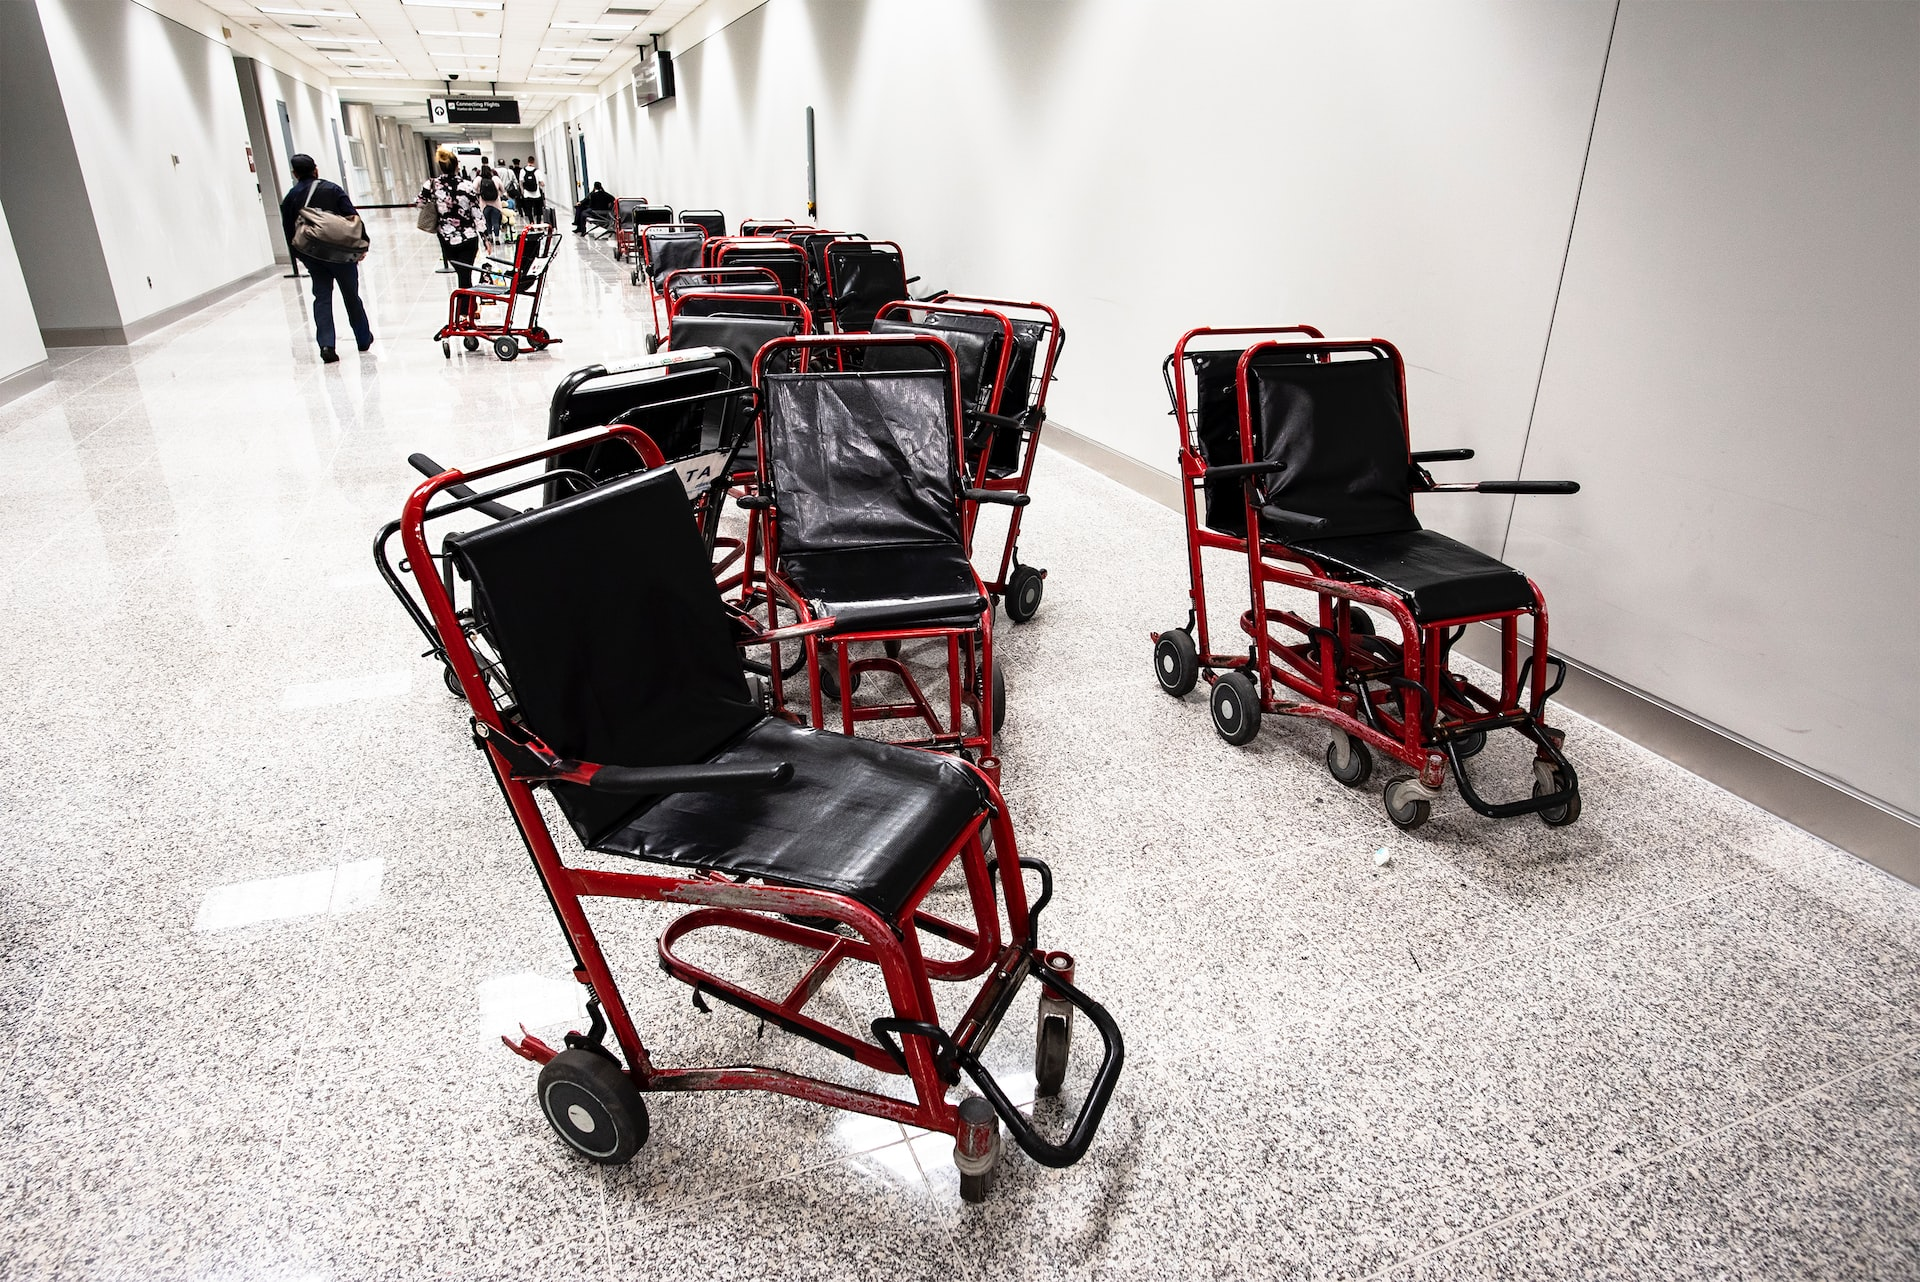 Wheelchairs in an airport hallway.